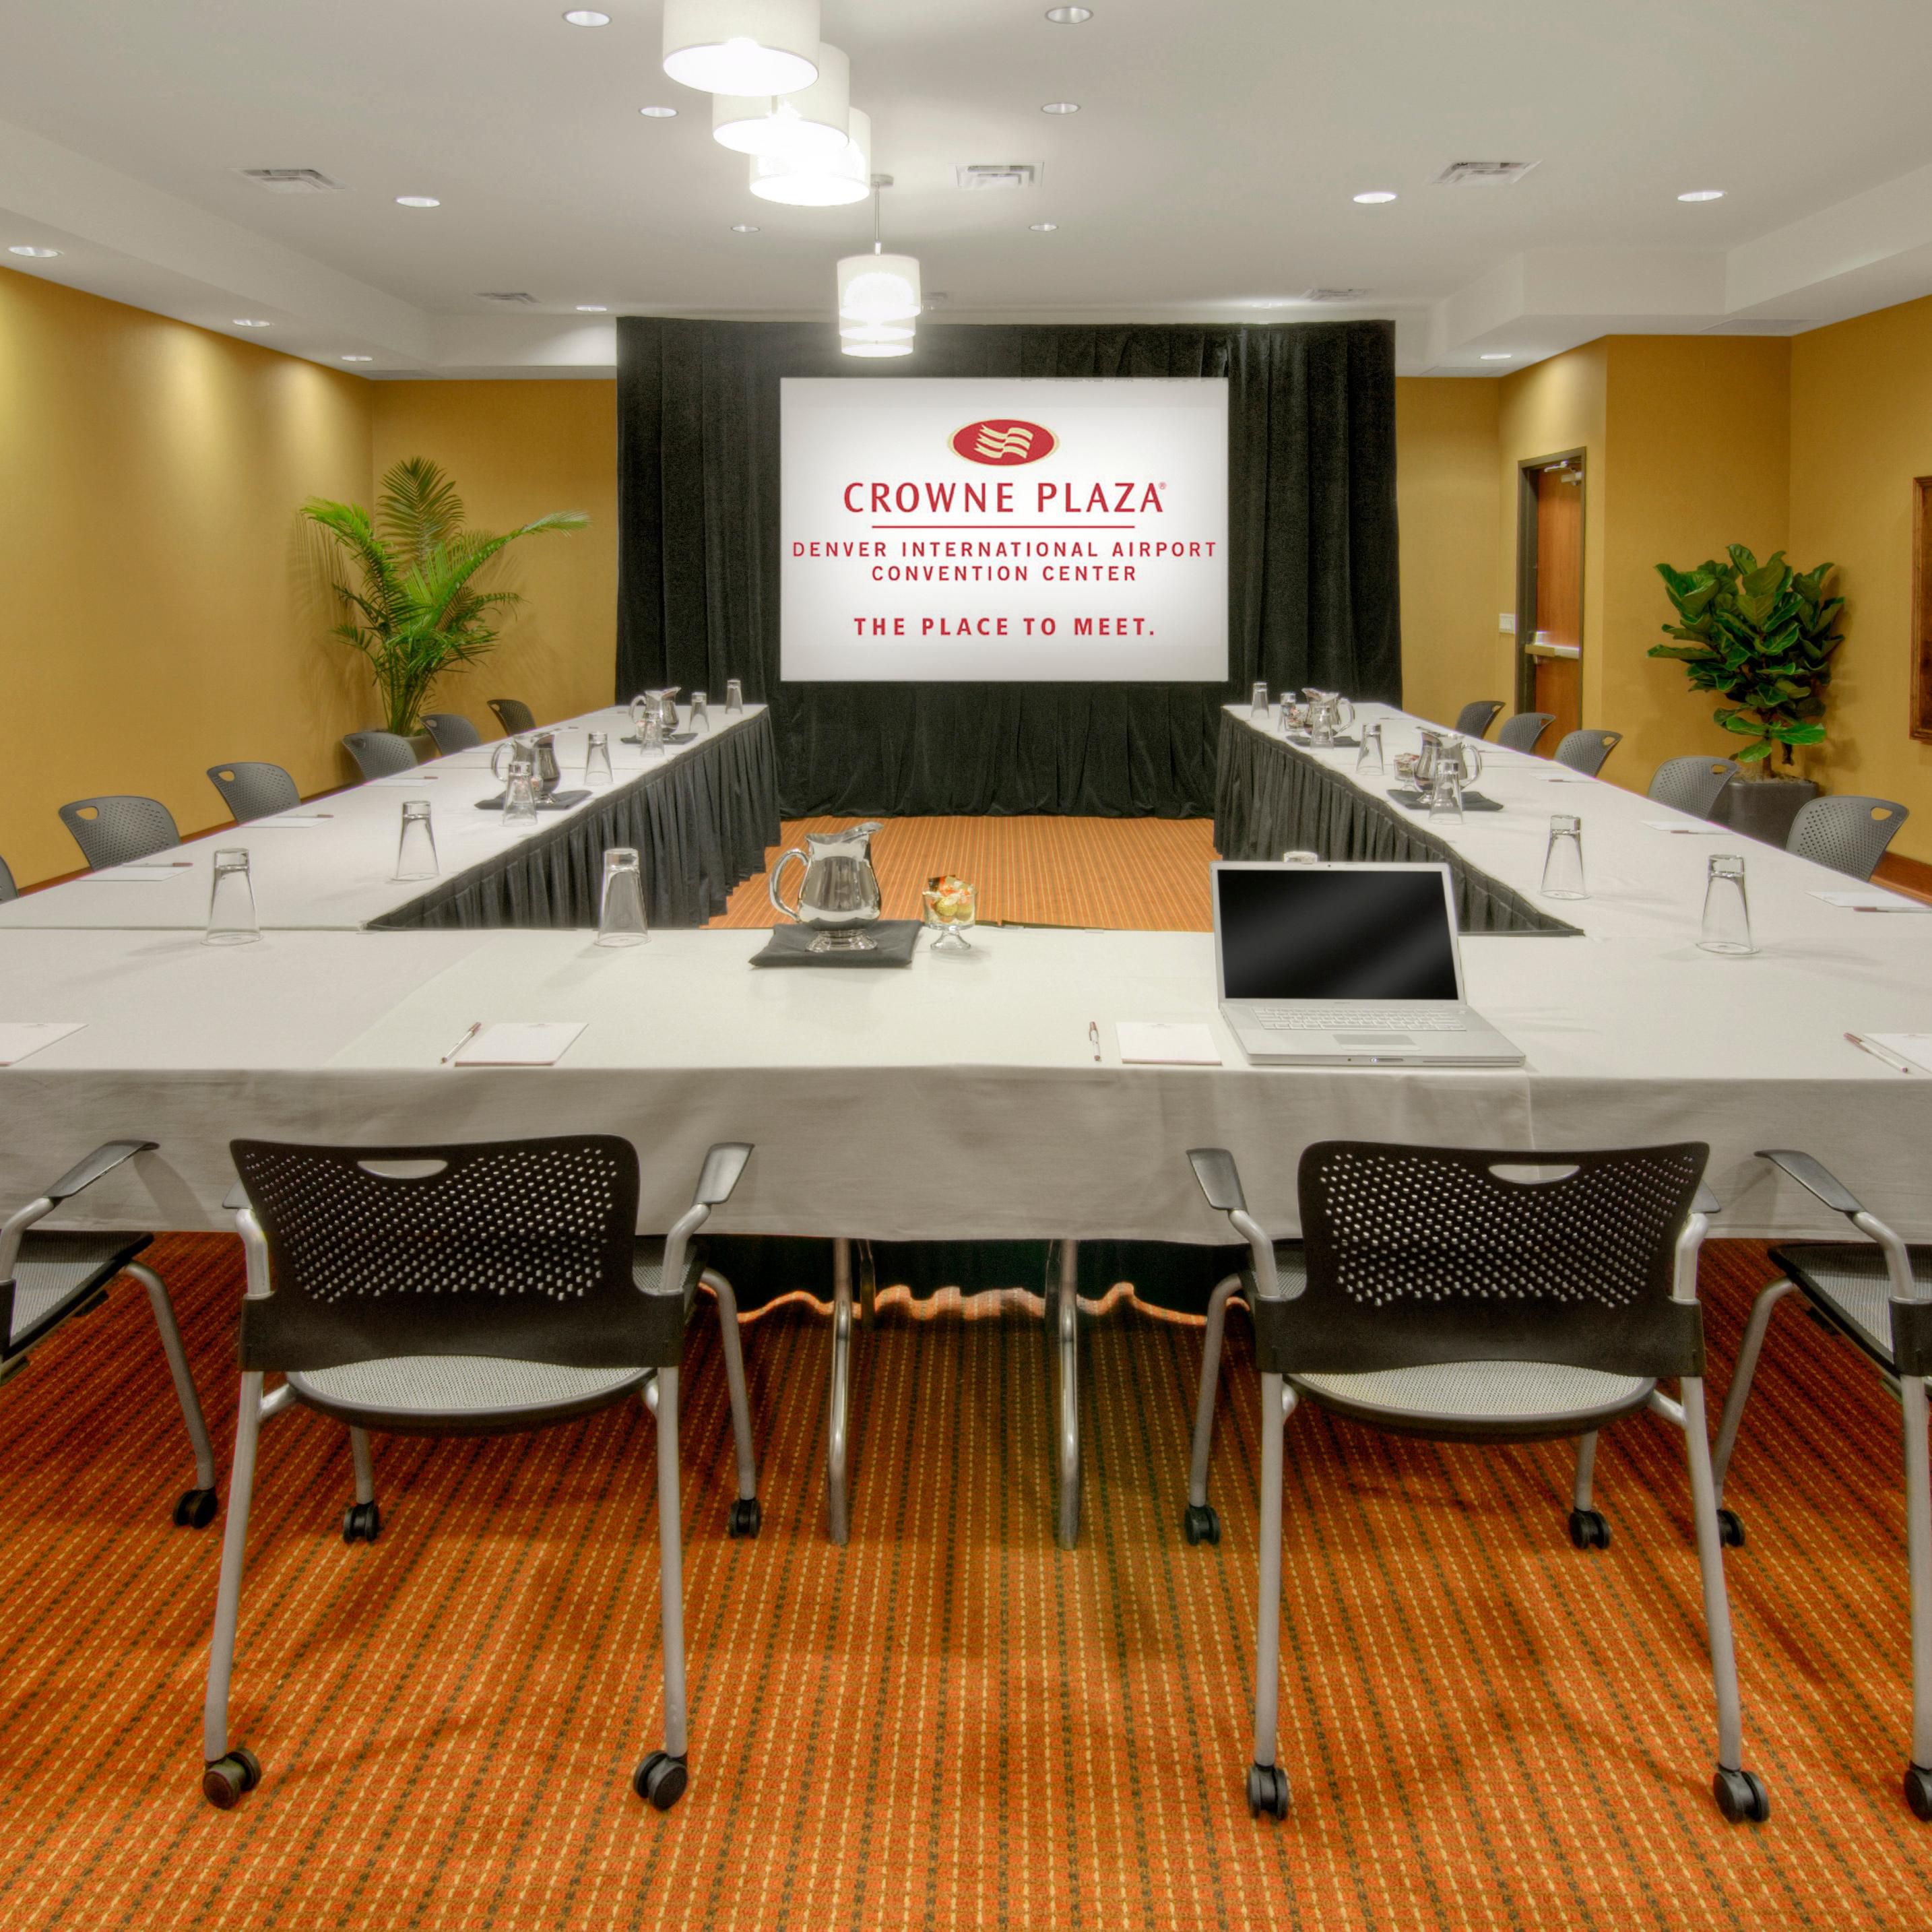 U style is perfect for your next conference.